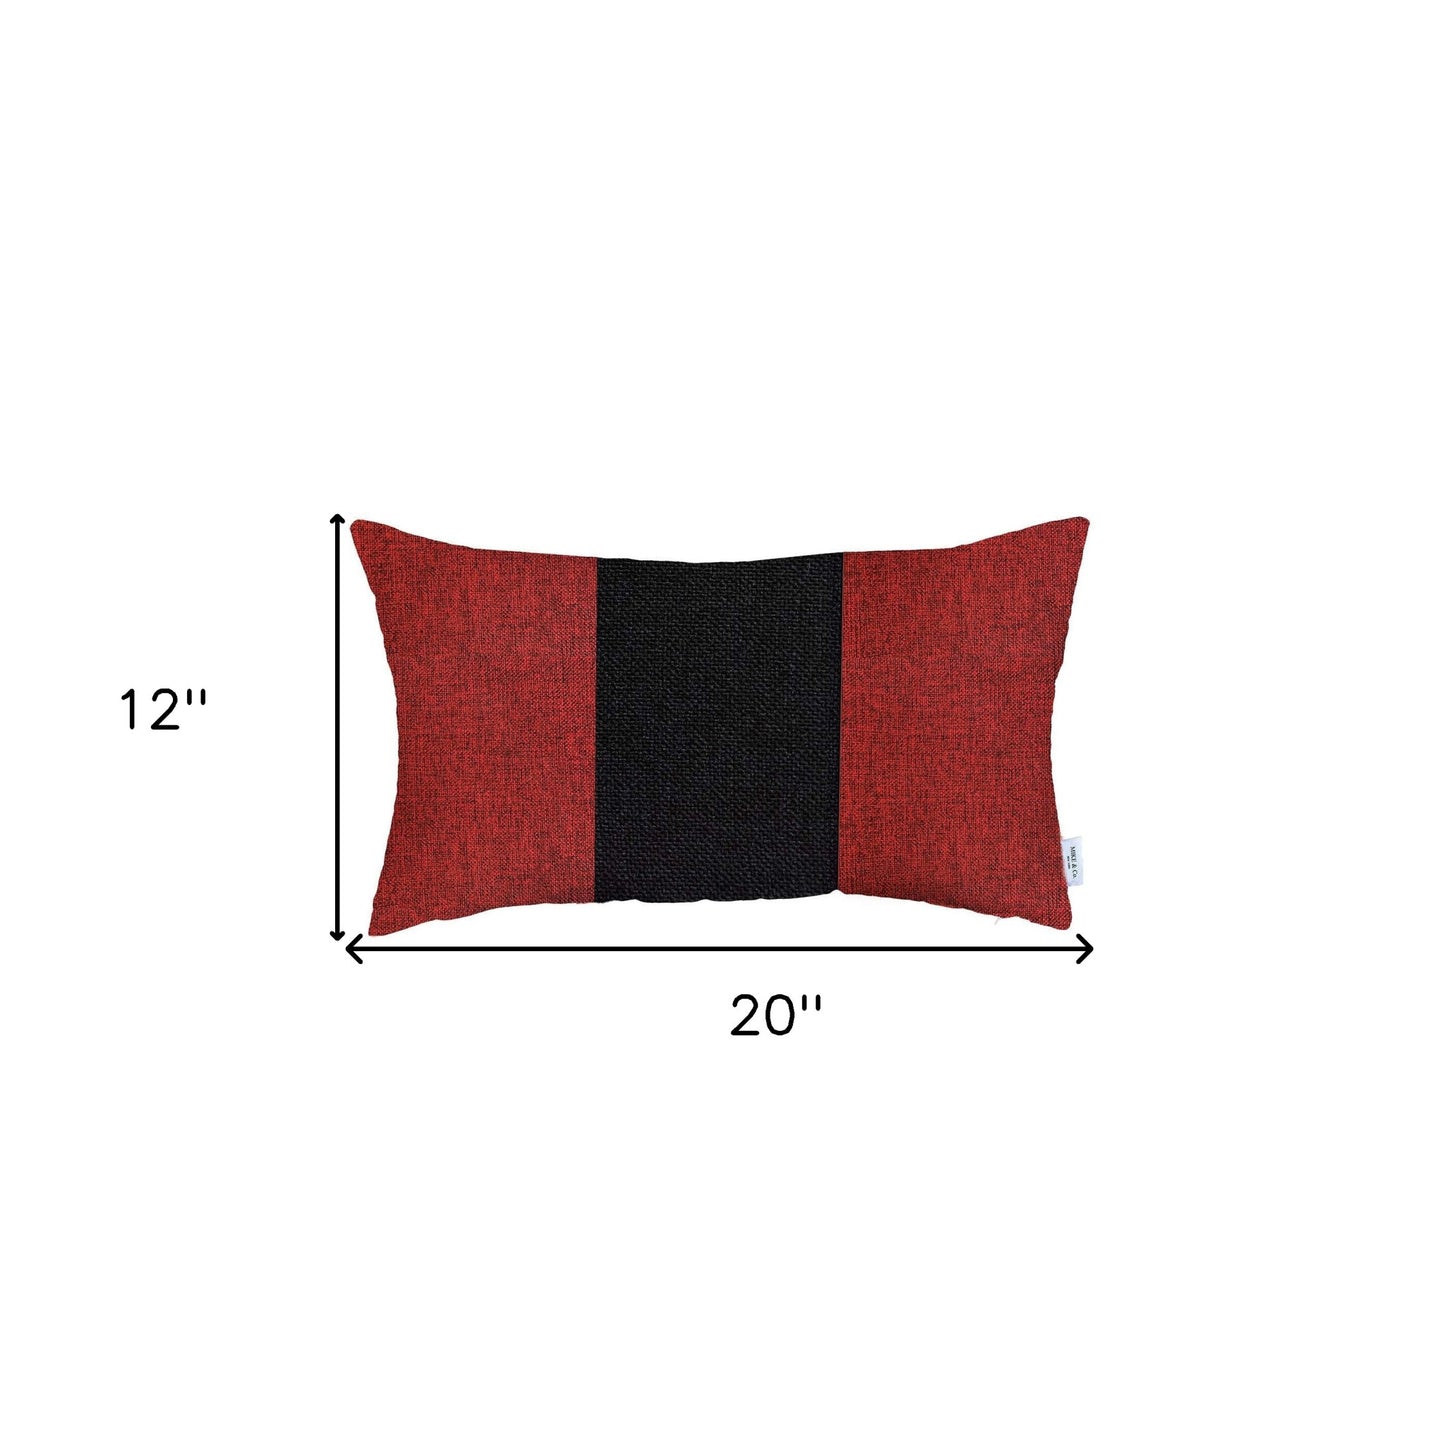 Red and Black Midsection Lumbar Throw Pillow